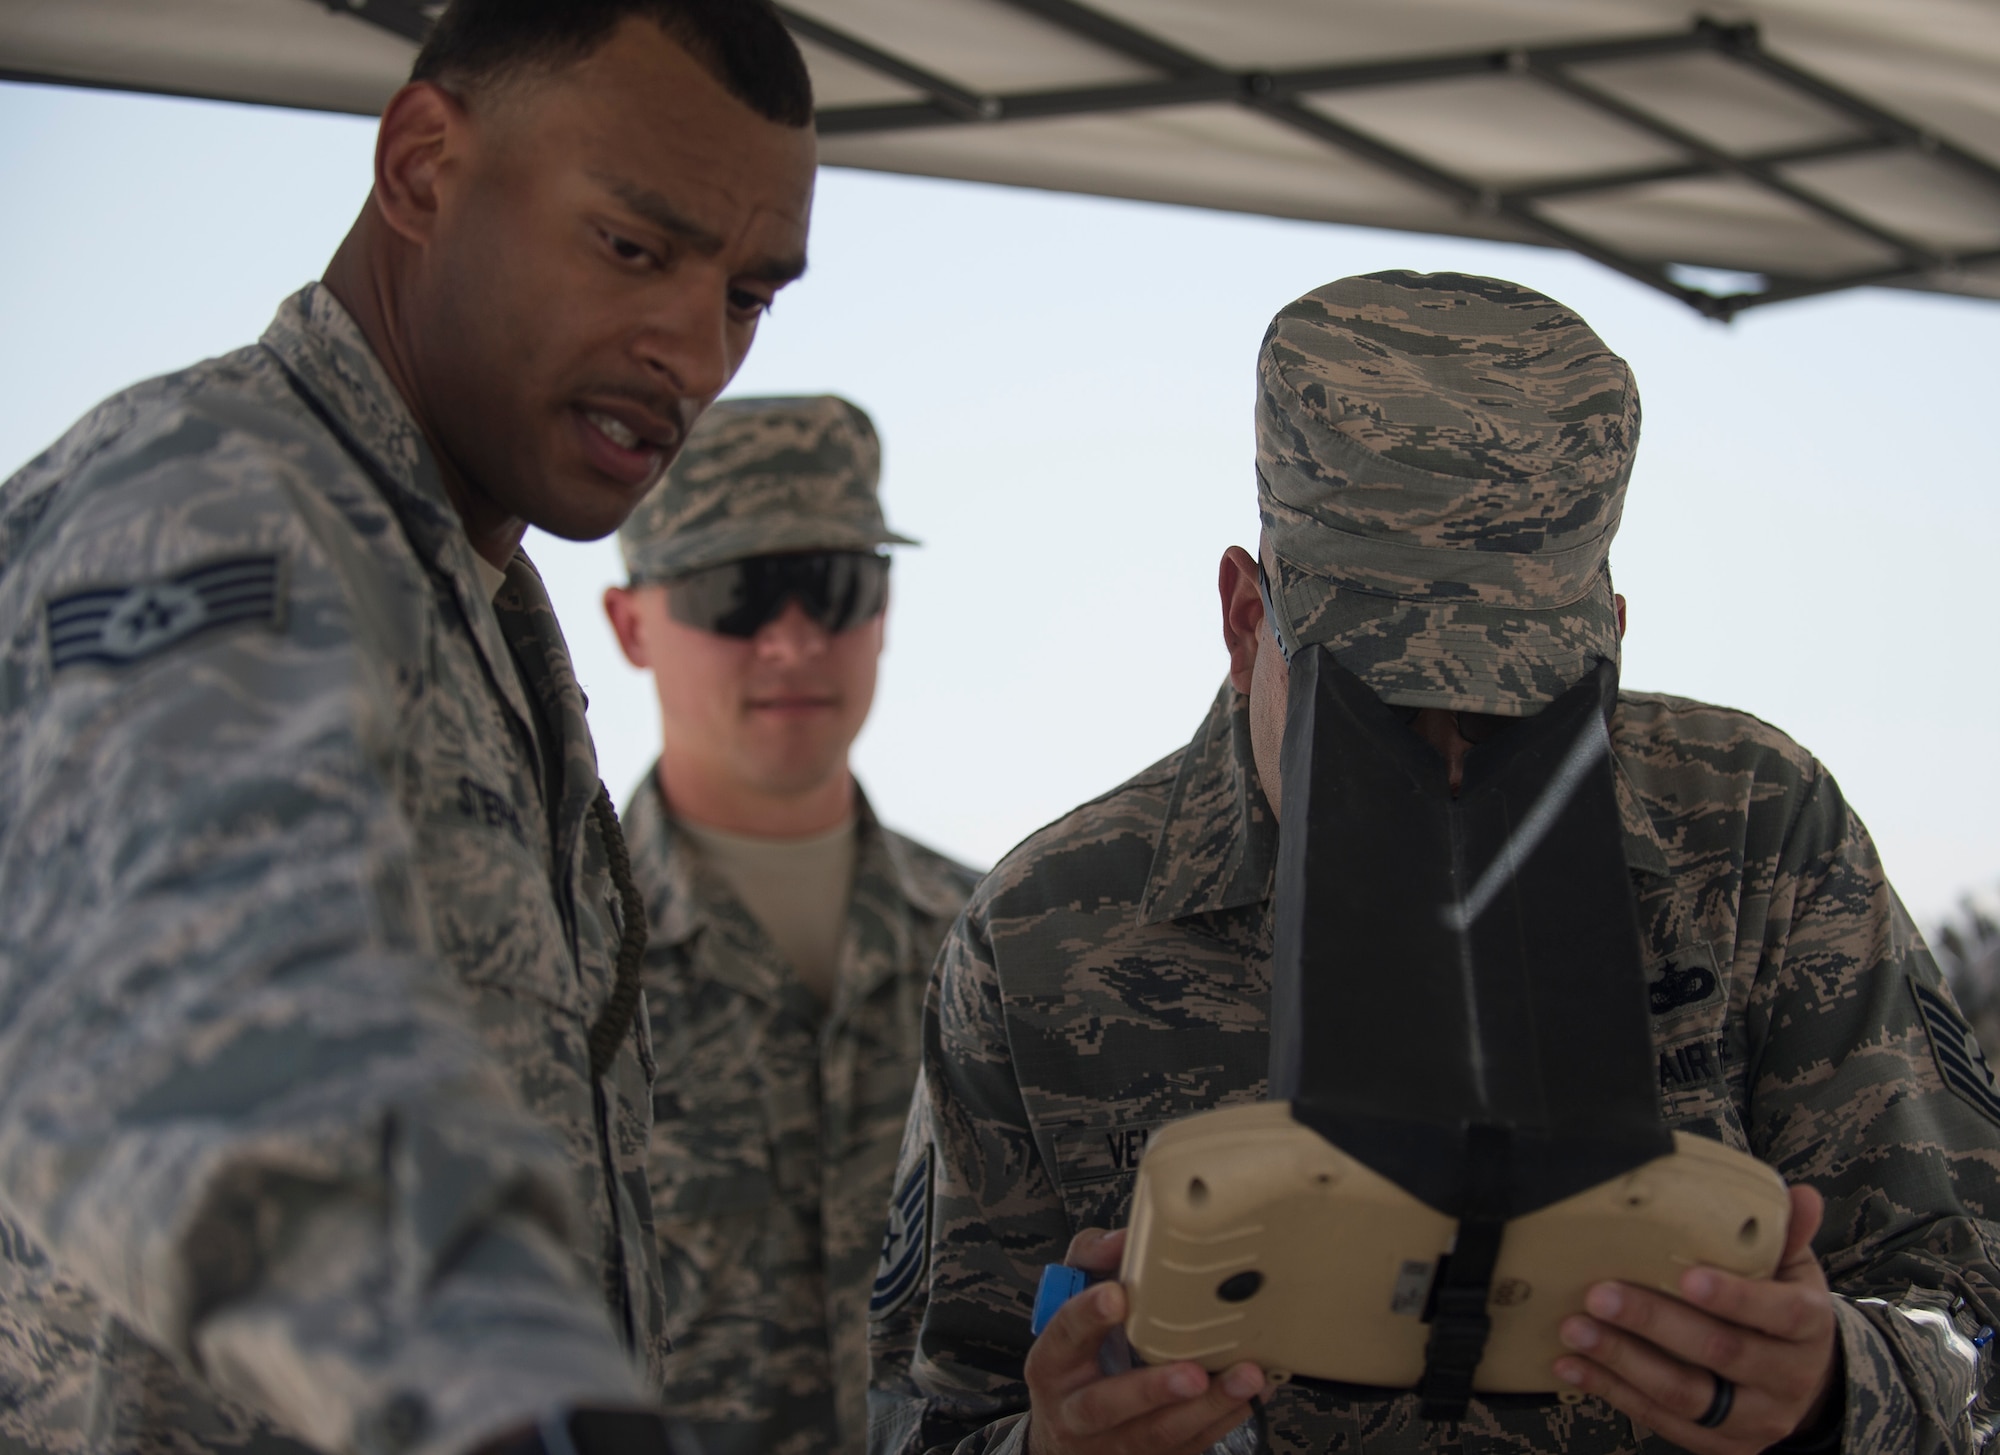 U.S. Air Force airman looks through a flight control module as Staff Sgt. Malcolm Stephen, left, assistant non-commissioned officer in charge of Raven B operations with 379th Expeditionary Security Forces Squadron, talks about what the RQ-11B Raven is showing on its color electro-optical camera at Al Udeid Air Base, Qatar, May 15, 2017. Airmen from the 379th ESFS organized a week of law enforcement activities to honor fallen civilian police officers, security forces airmen and U.S. Air Force Office of Special Investigations agents who died in the line of duty. (U.S. Air Force photo by Tech. Sgt. Amy M. Lovgren)